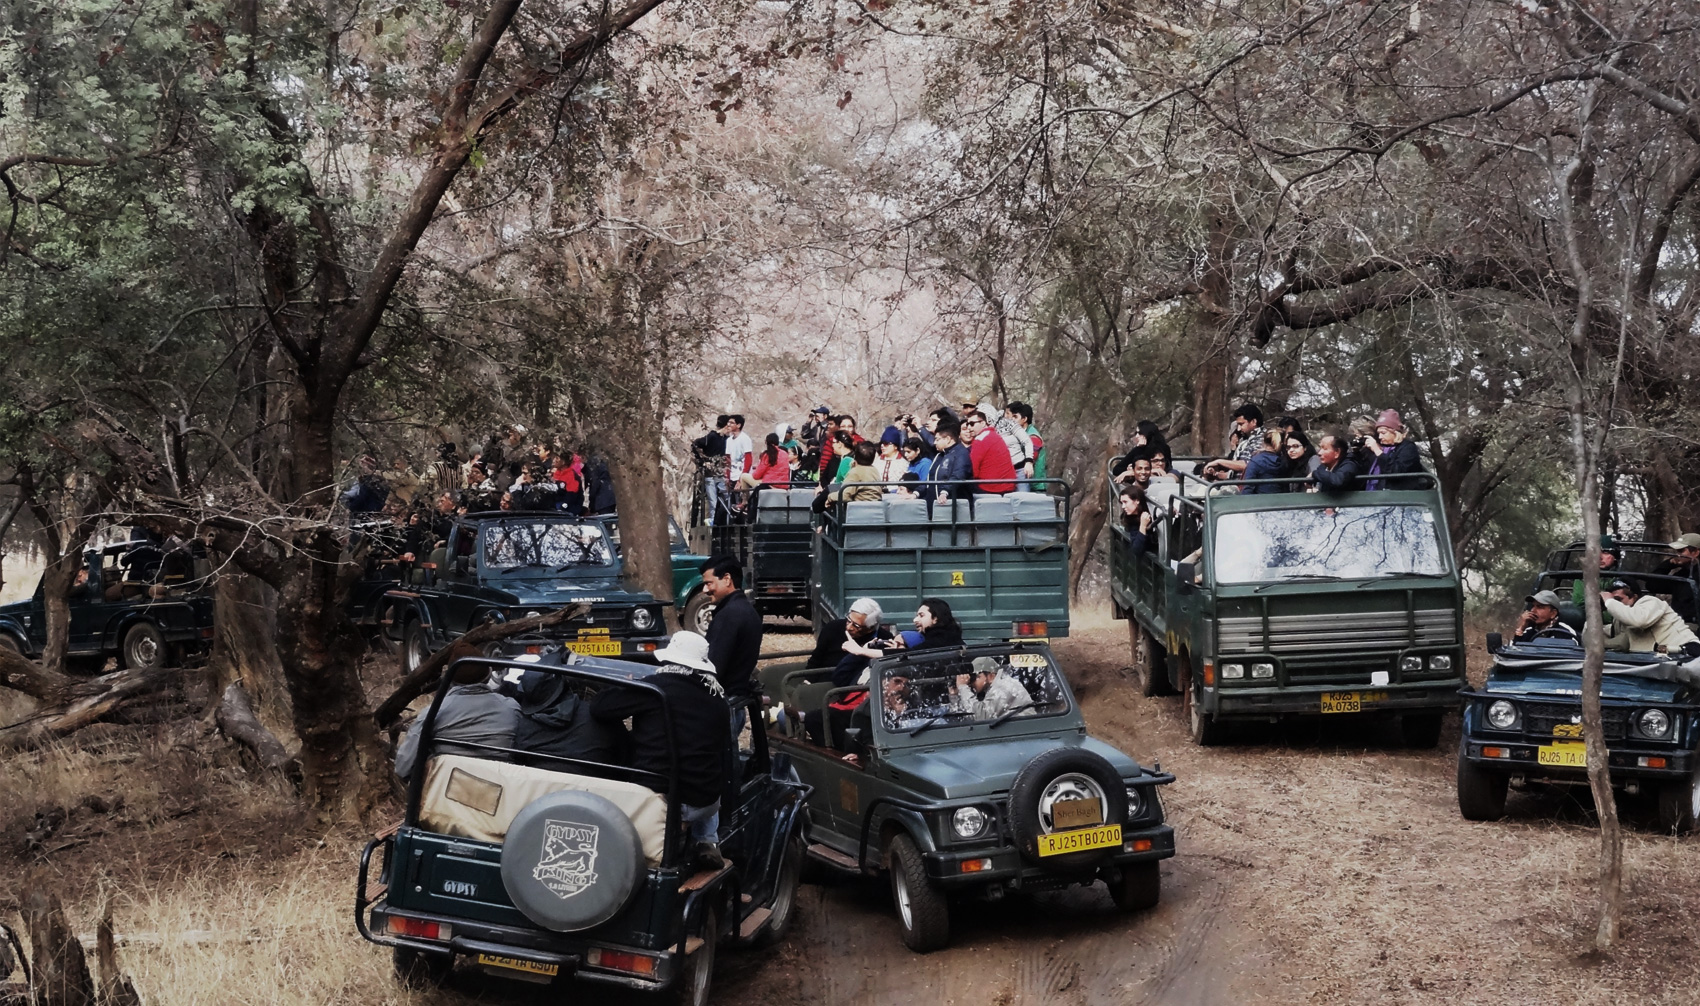 CONFIRM Ranthambore jeep safari booking in your favorite Zone 1 to 6